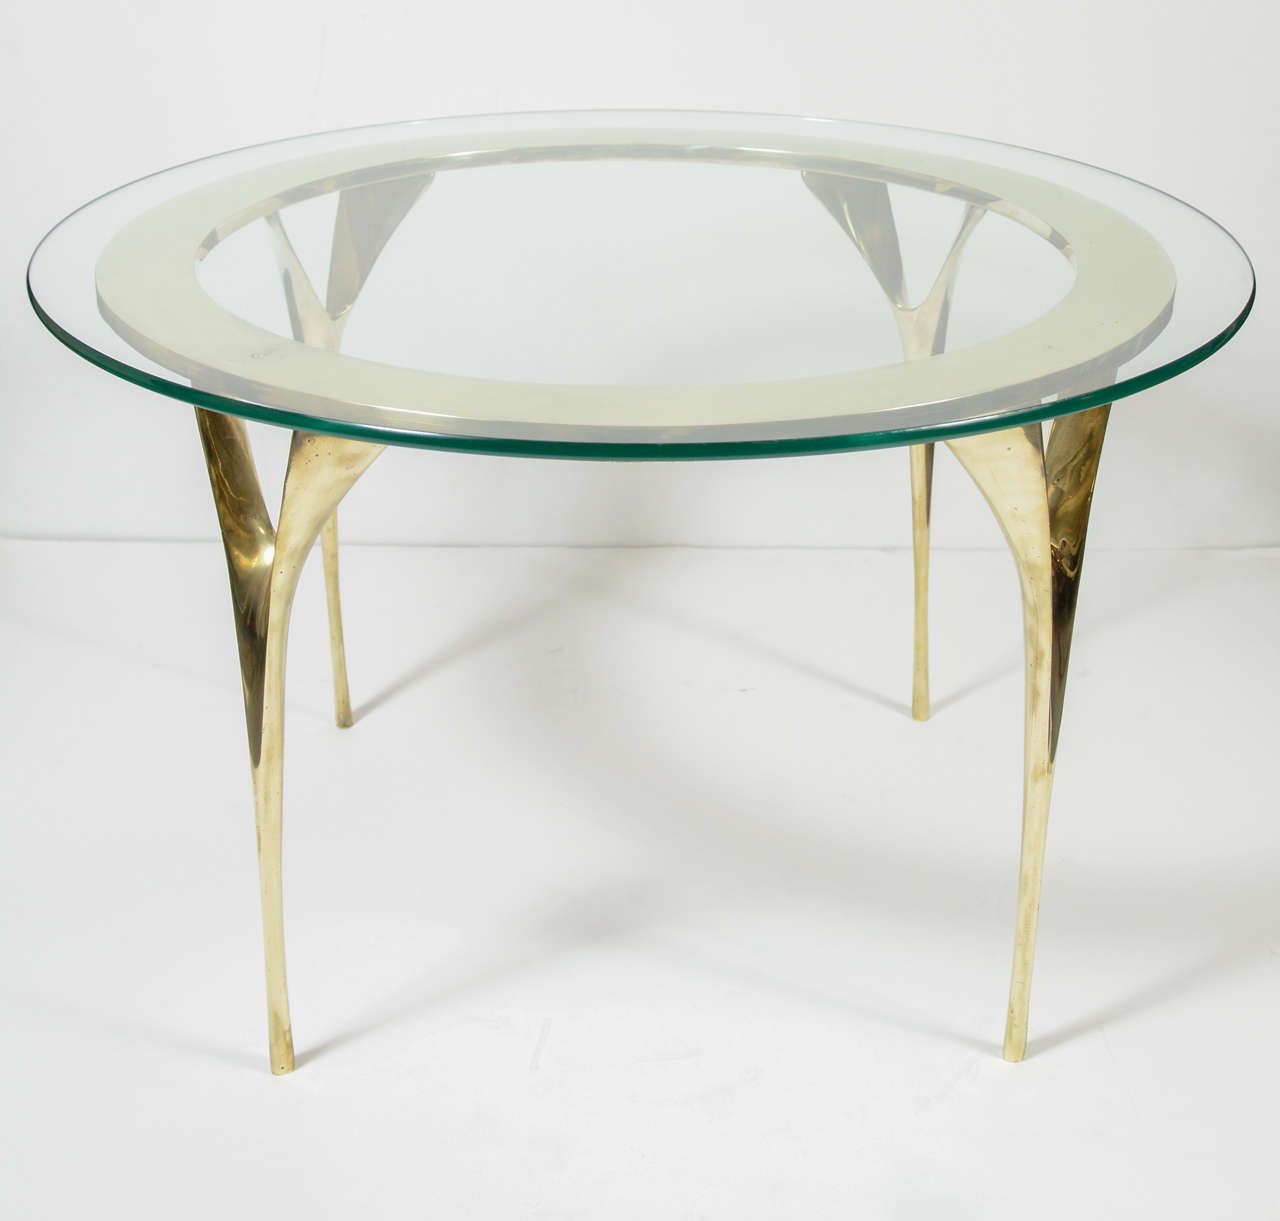 This chic Modernist cocktail table features fine stiletto legs around a brass rim and glass top.Really beautifully made and executed.